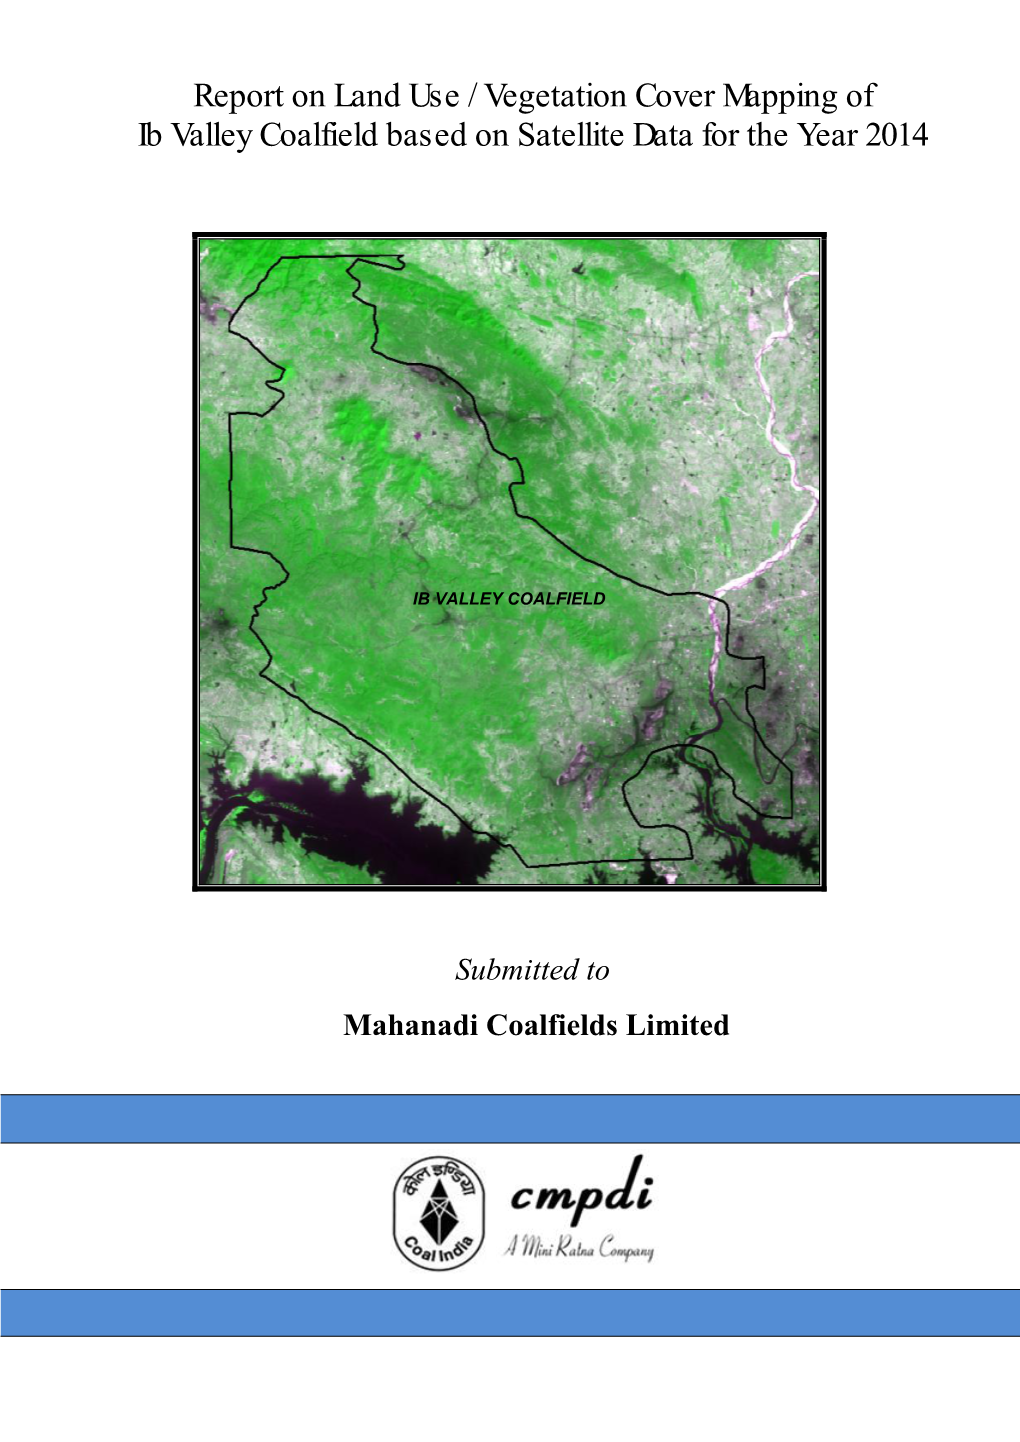 Report on Land Use / Vegetation Cover Mapping of Ib Valley Coalfield Based on Satellite Data for the Year 2014